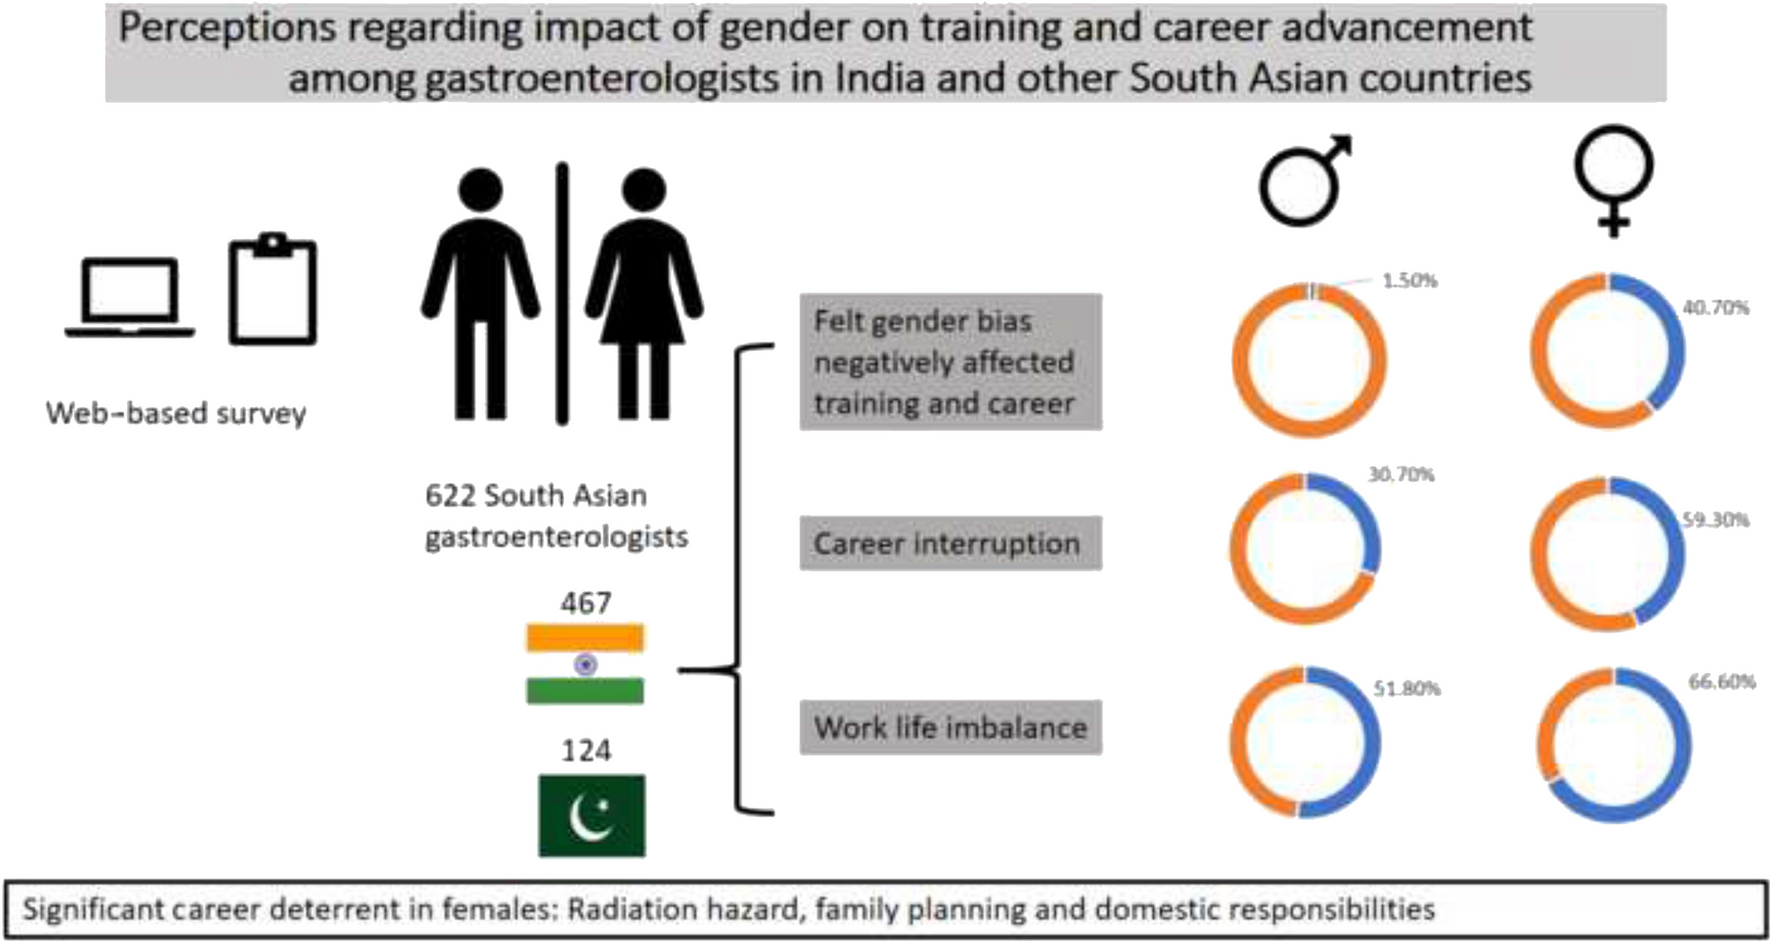 Perceptions regarding the impact of gender on training and career advancement among gastroenterologists in India and other South Asian countries